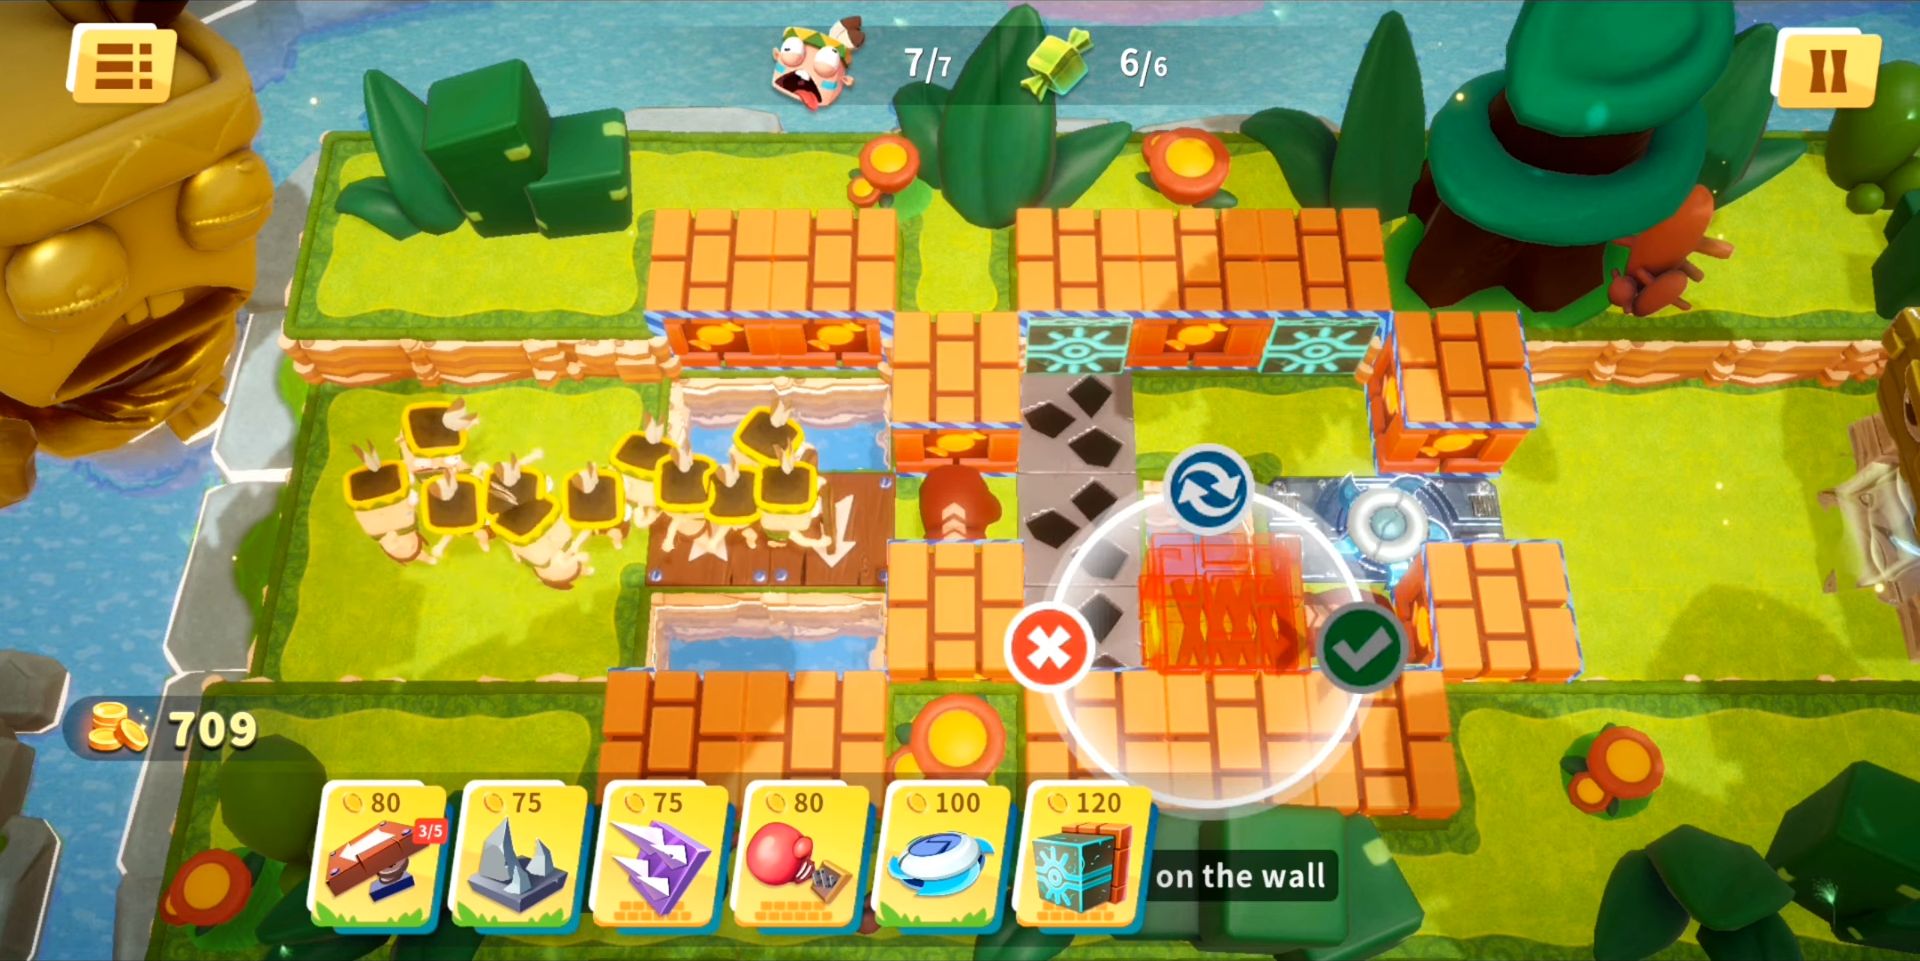 Gameplay of the Candy Disaster TD (Full Ver.) for Android phone or tablet.